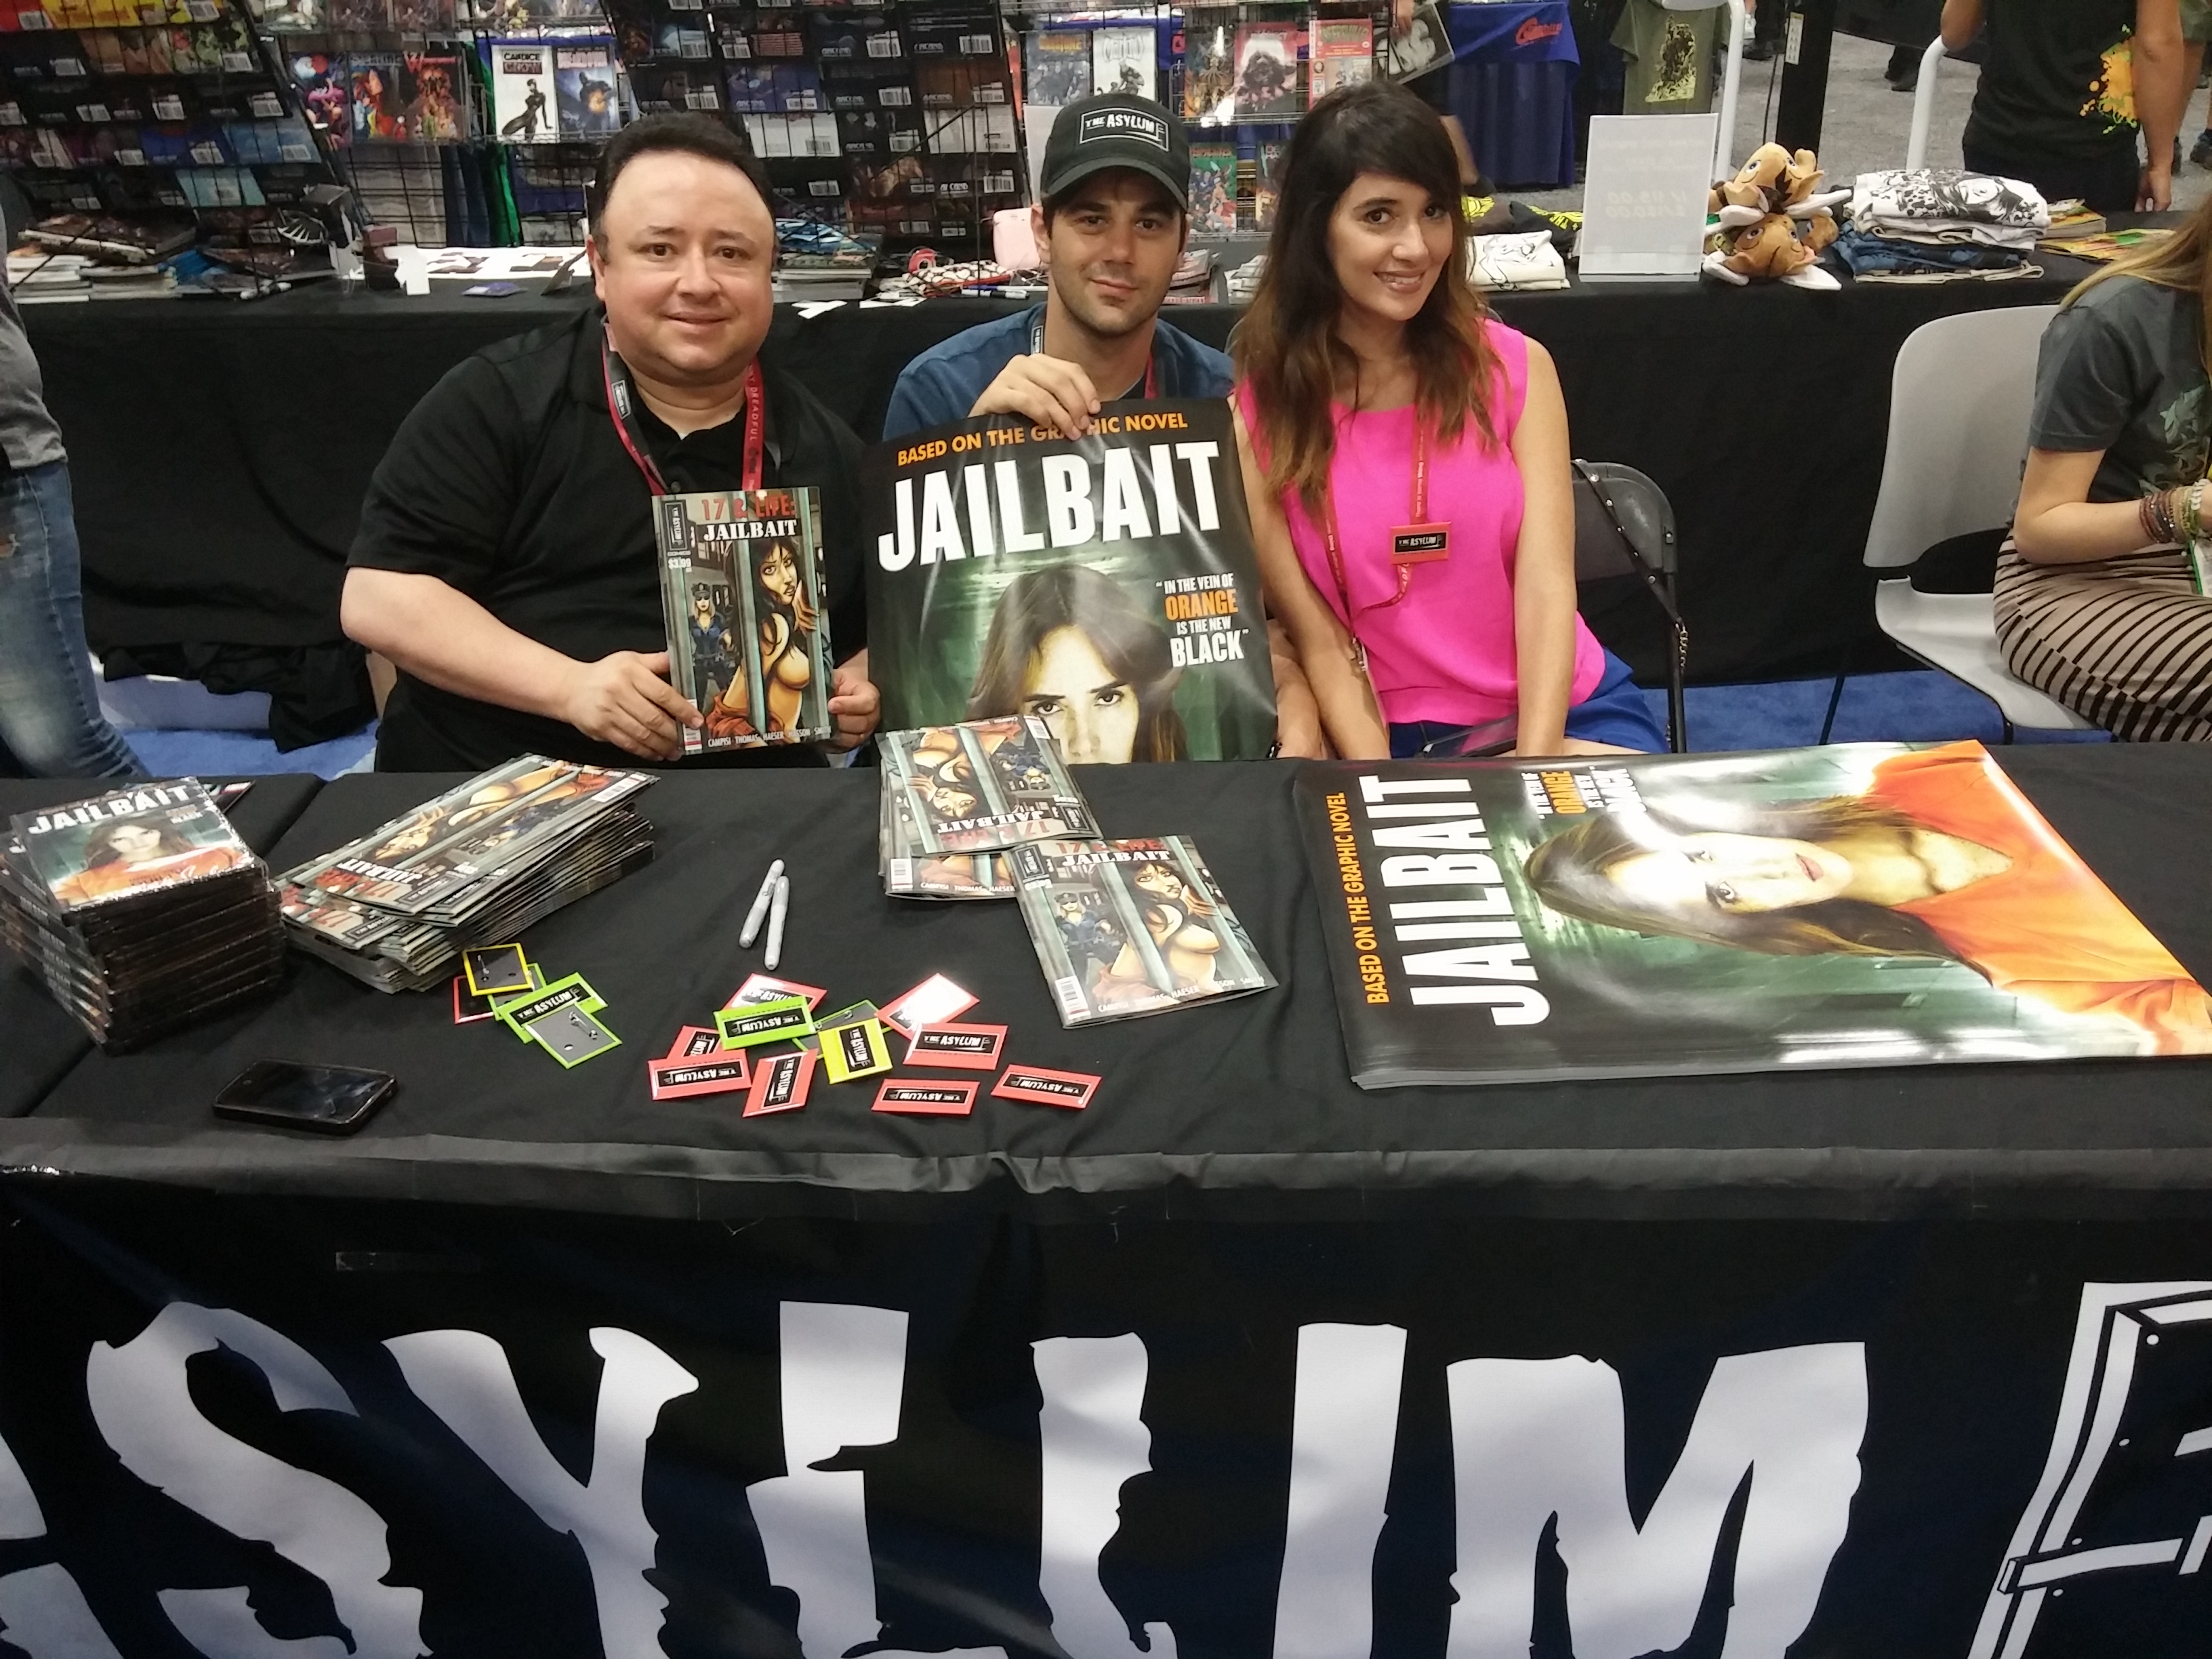 Gabriel Campisi, Jared Cohn and Sara Malakul Lane at San Diego Comic Con at the Asylum booth, signing for the Jailbait movie and comic book.